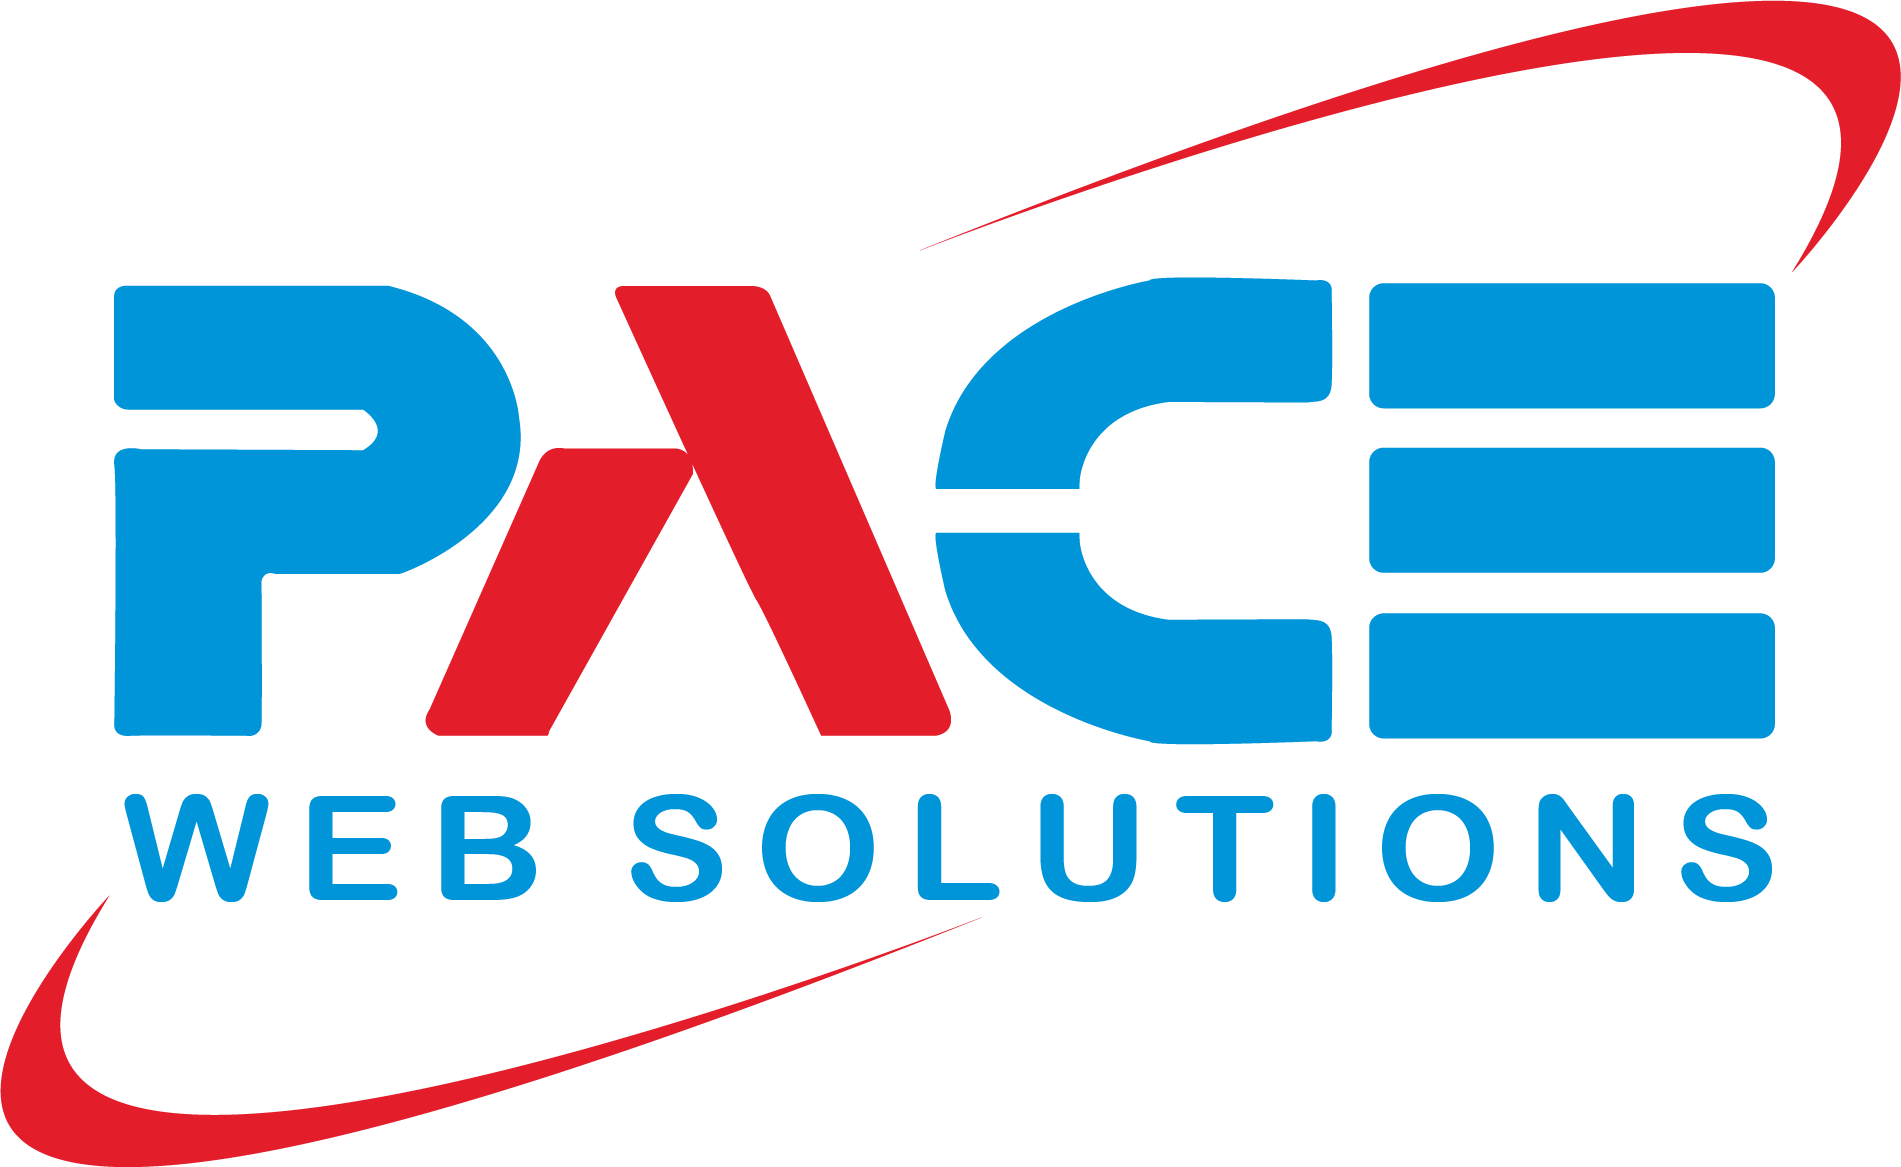 Solution start. Smart solutions лого. Pace мир. Pace logo. Paces website.